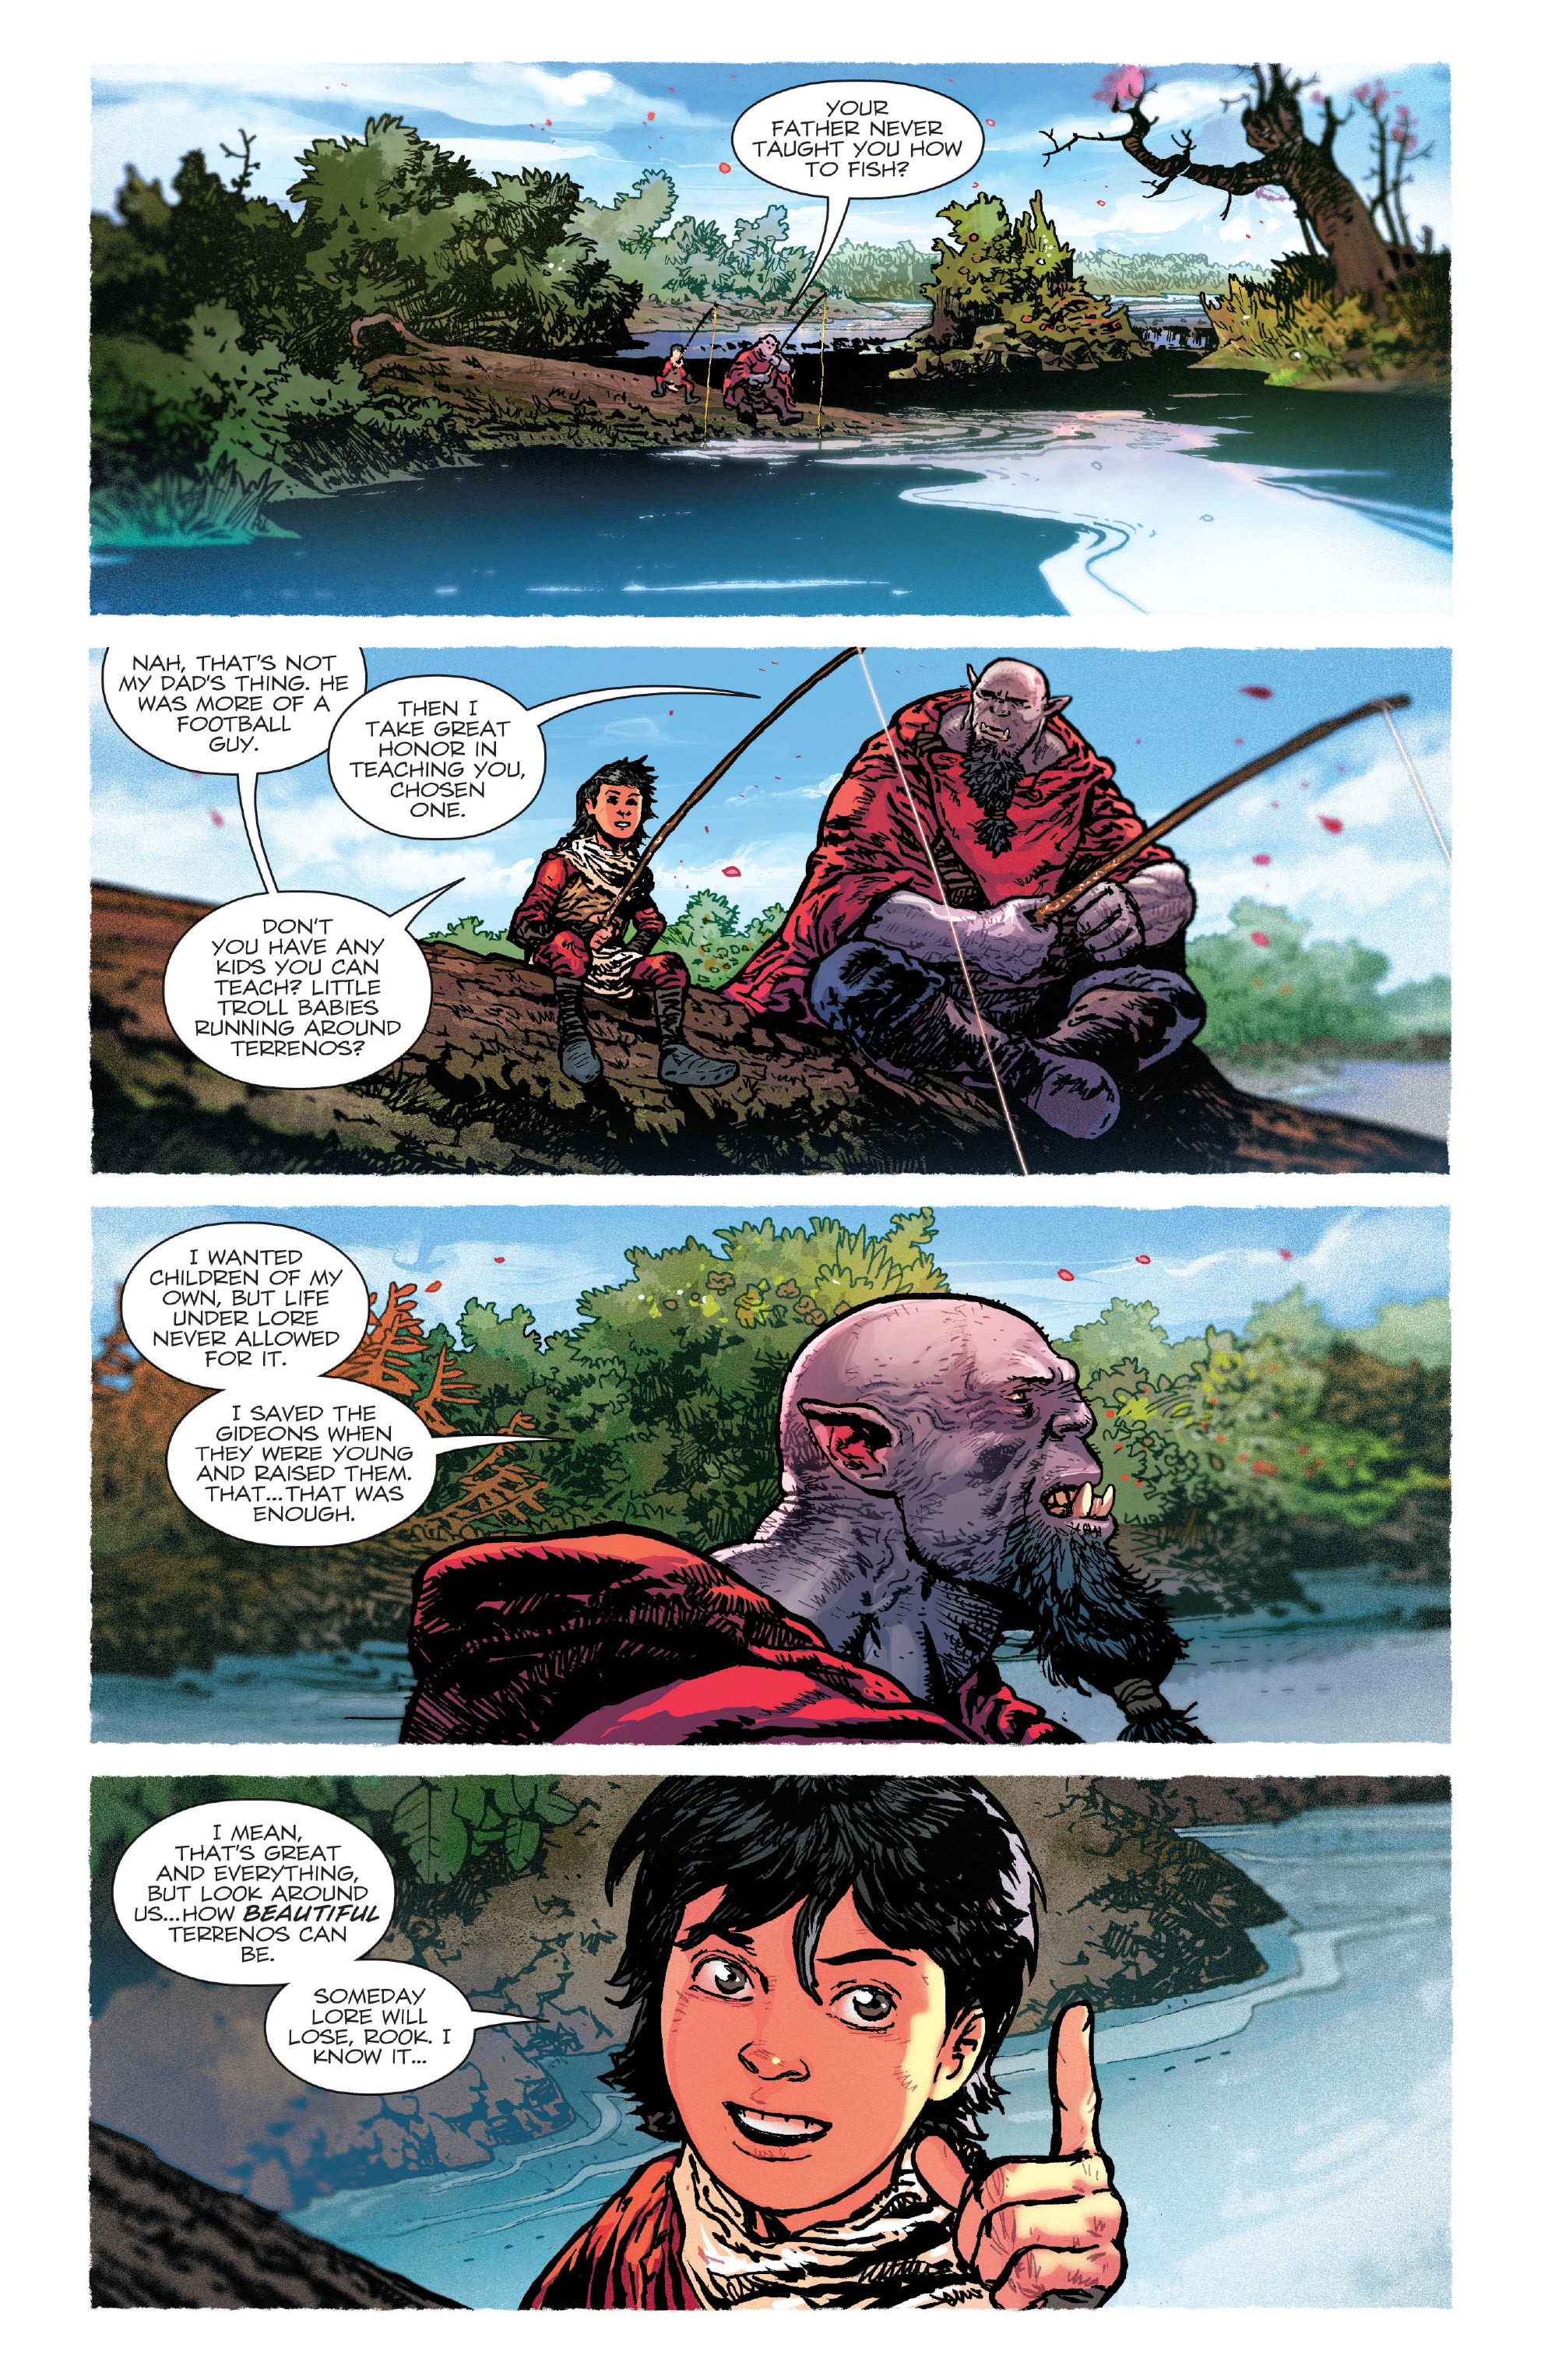 Birthright (2014-): Chapter 42 - Page 3